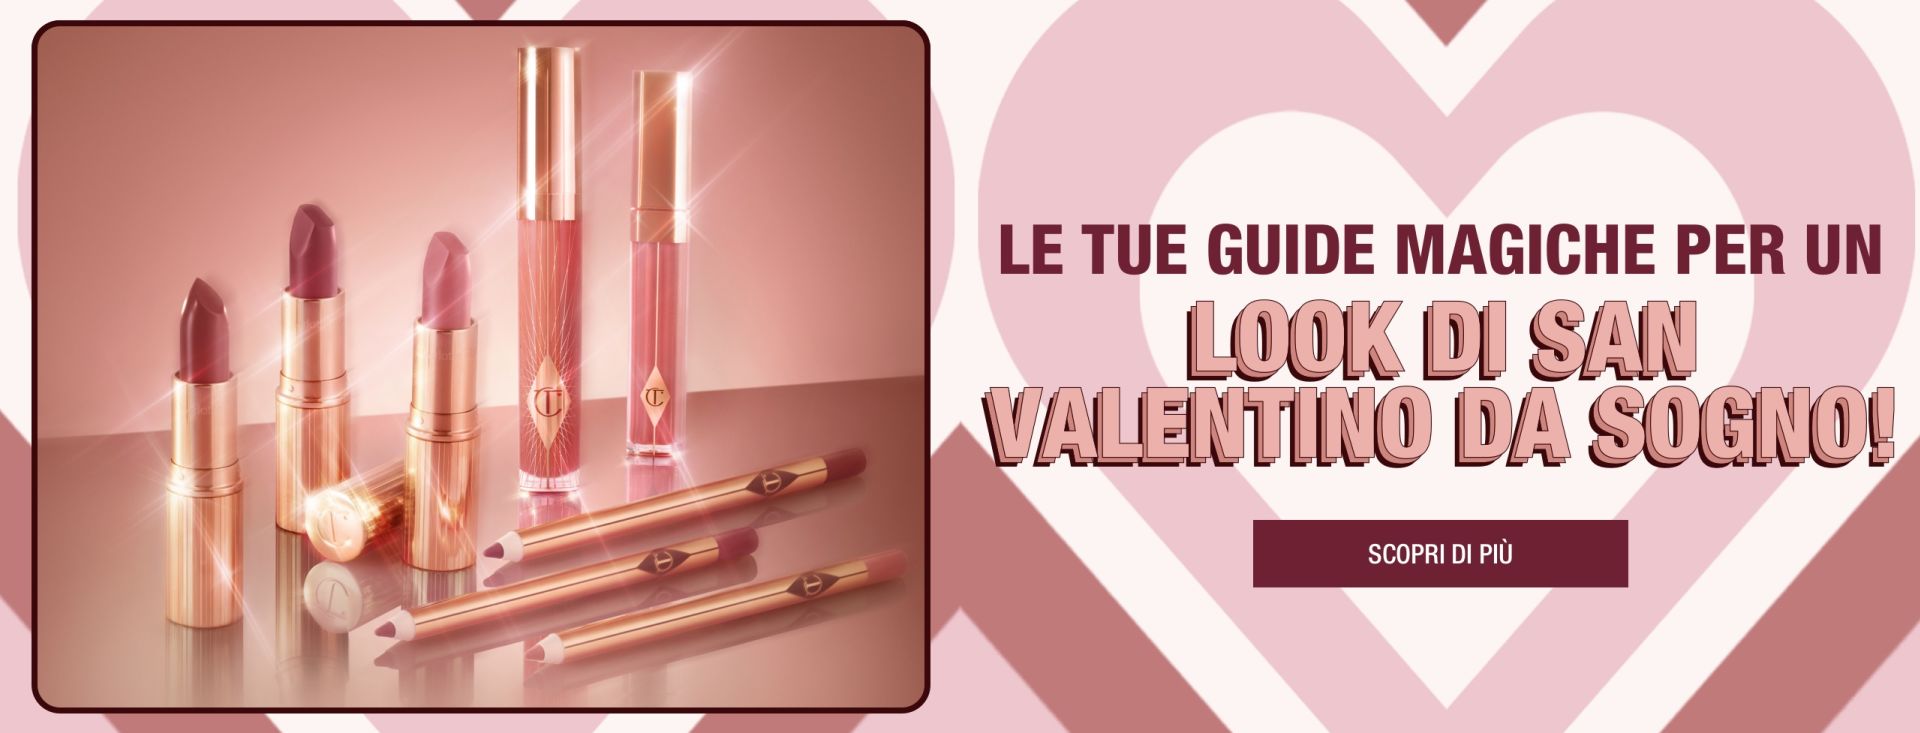 Discover tutorials on Valentine's day! Discover more.